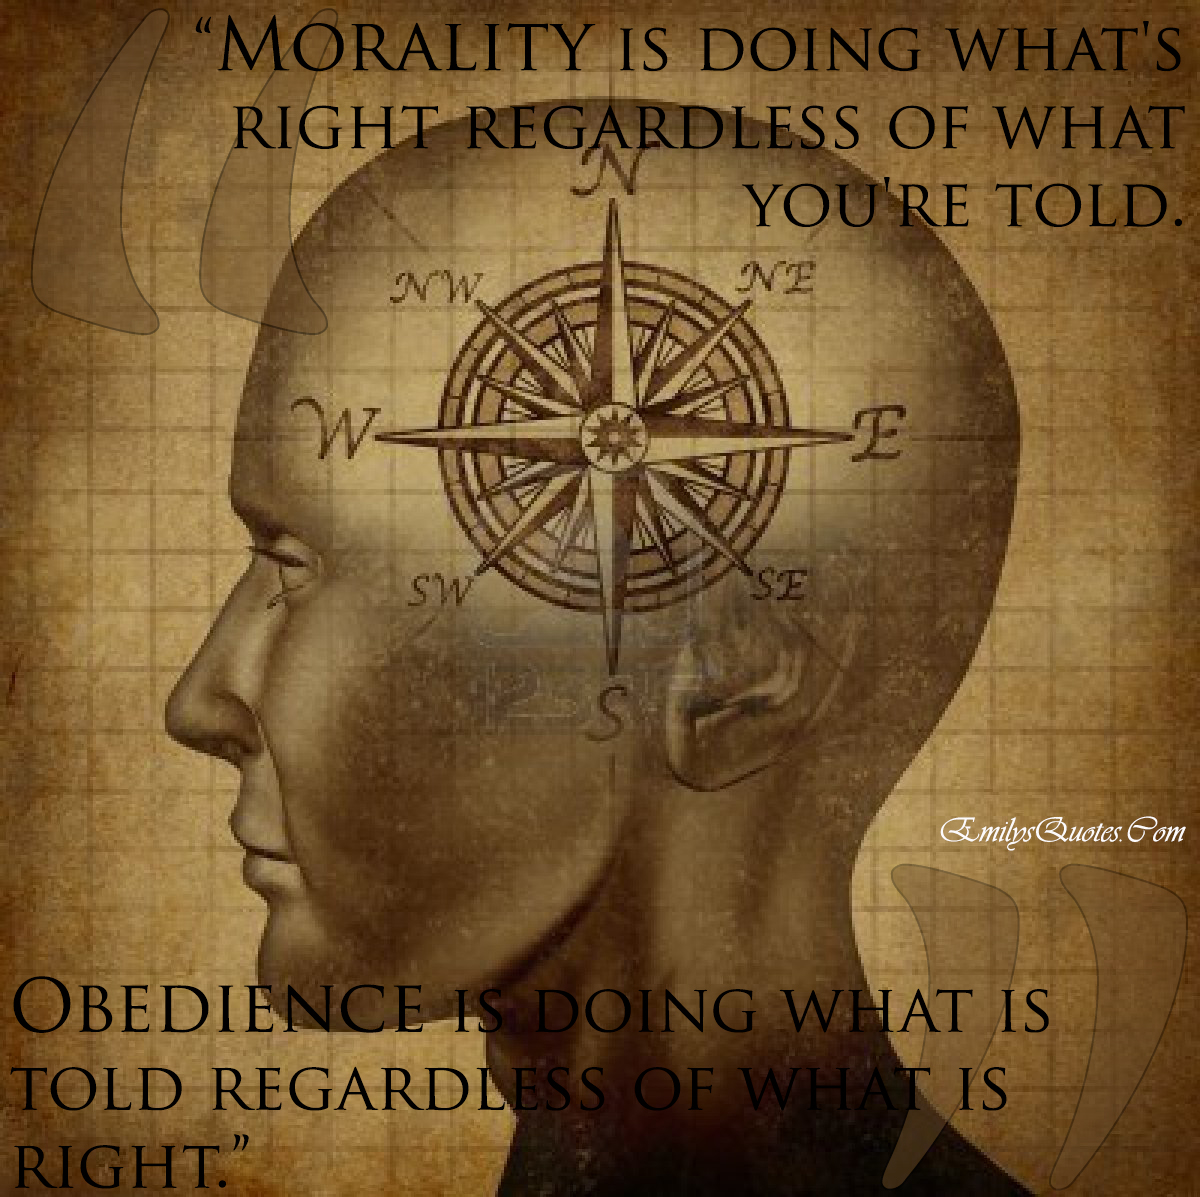 Morality is doing what's right regardless of what you're told. Obedience is doing what is told regardless of what is right